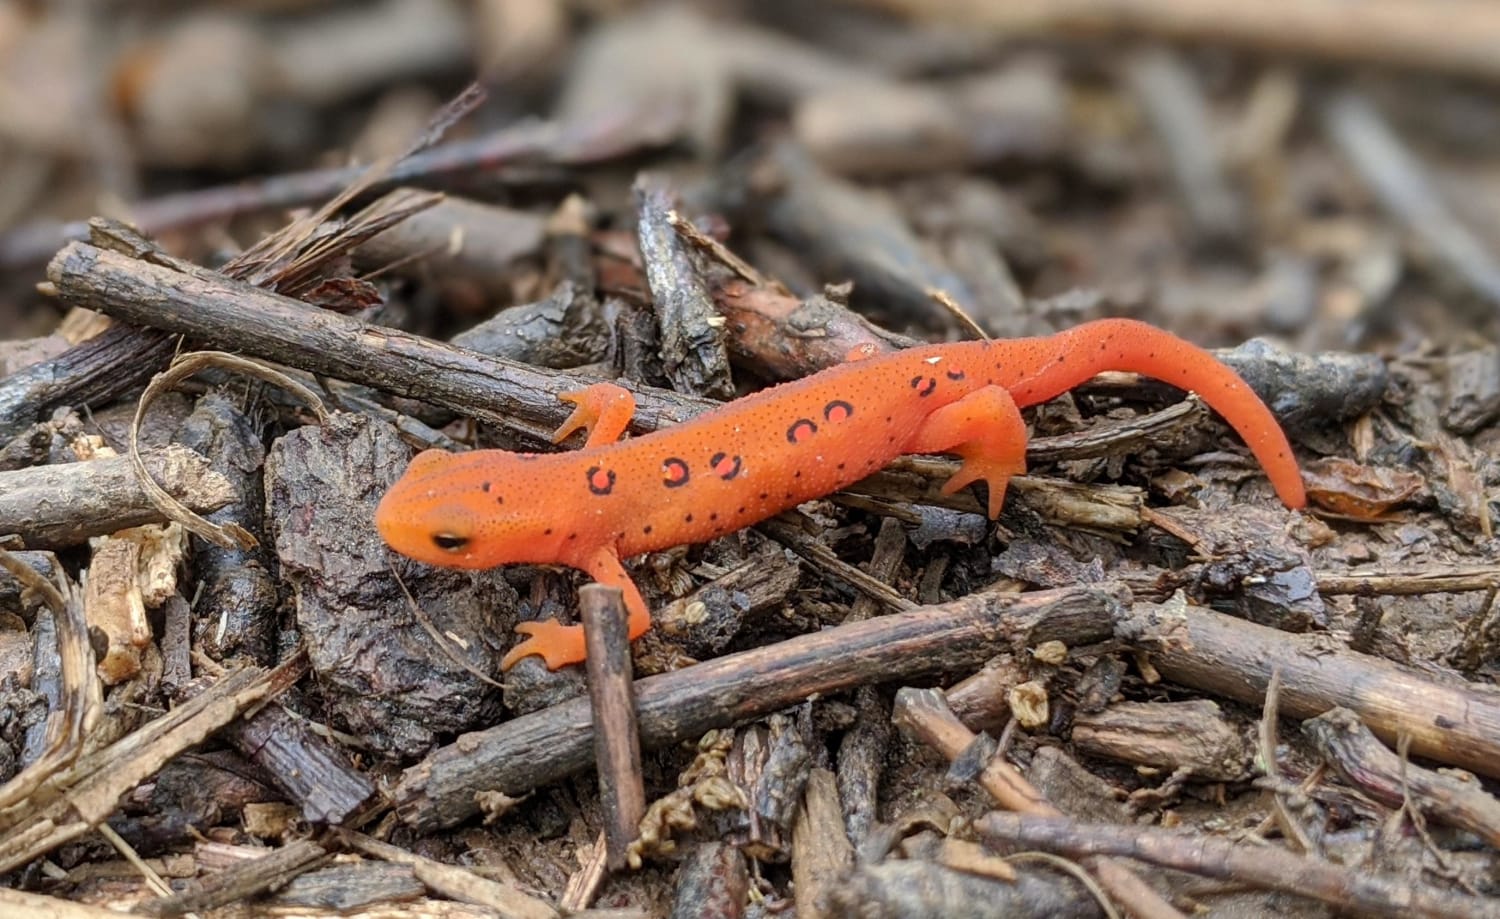 This red eft I found while hiking in the Blueridge Mnts looked like it was ready to start a forest fire